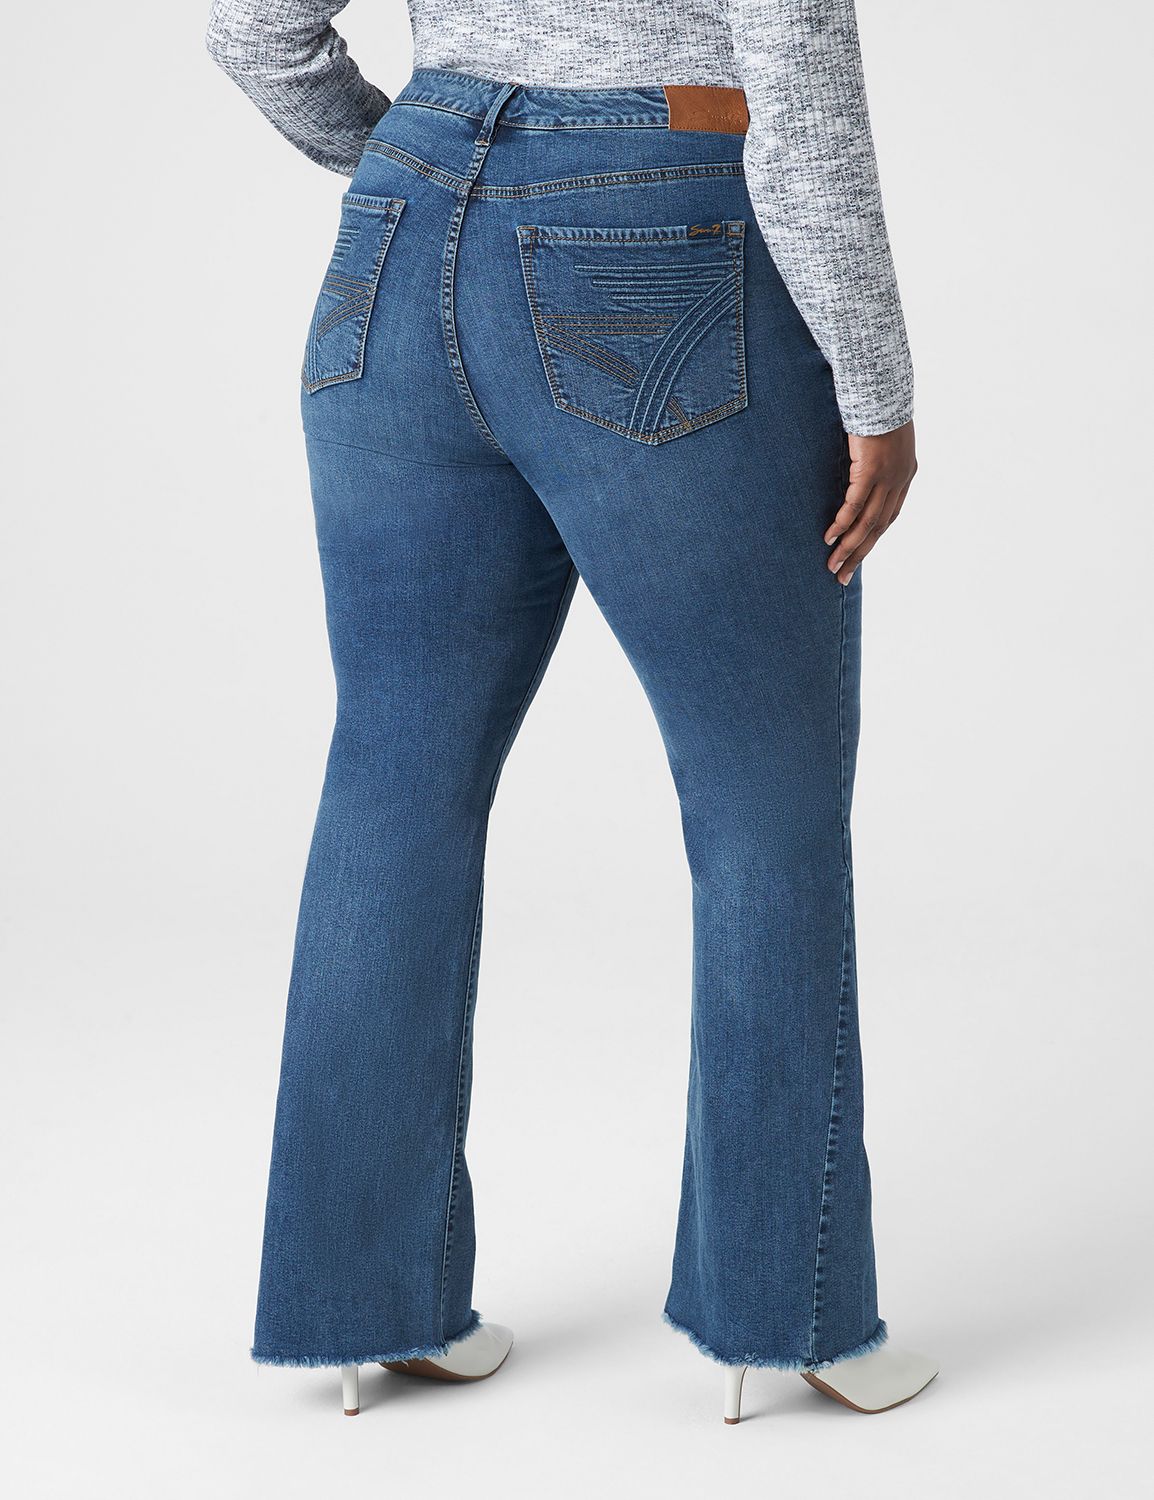 High Rise Slim Flare Jean at Seven7 Jeans